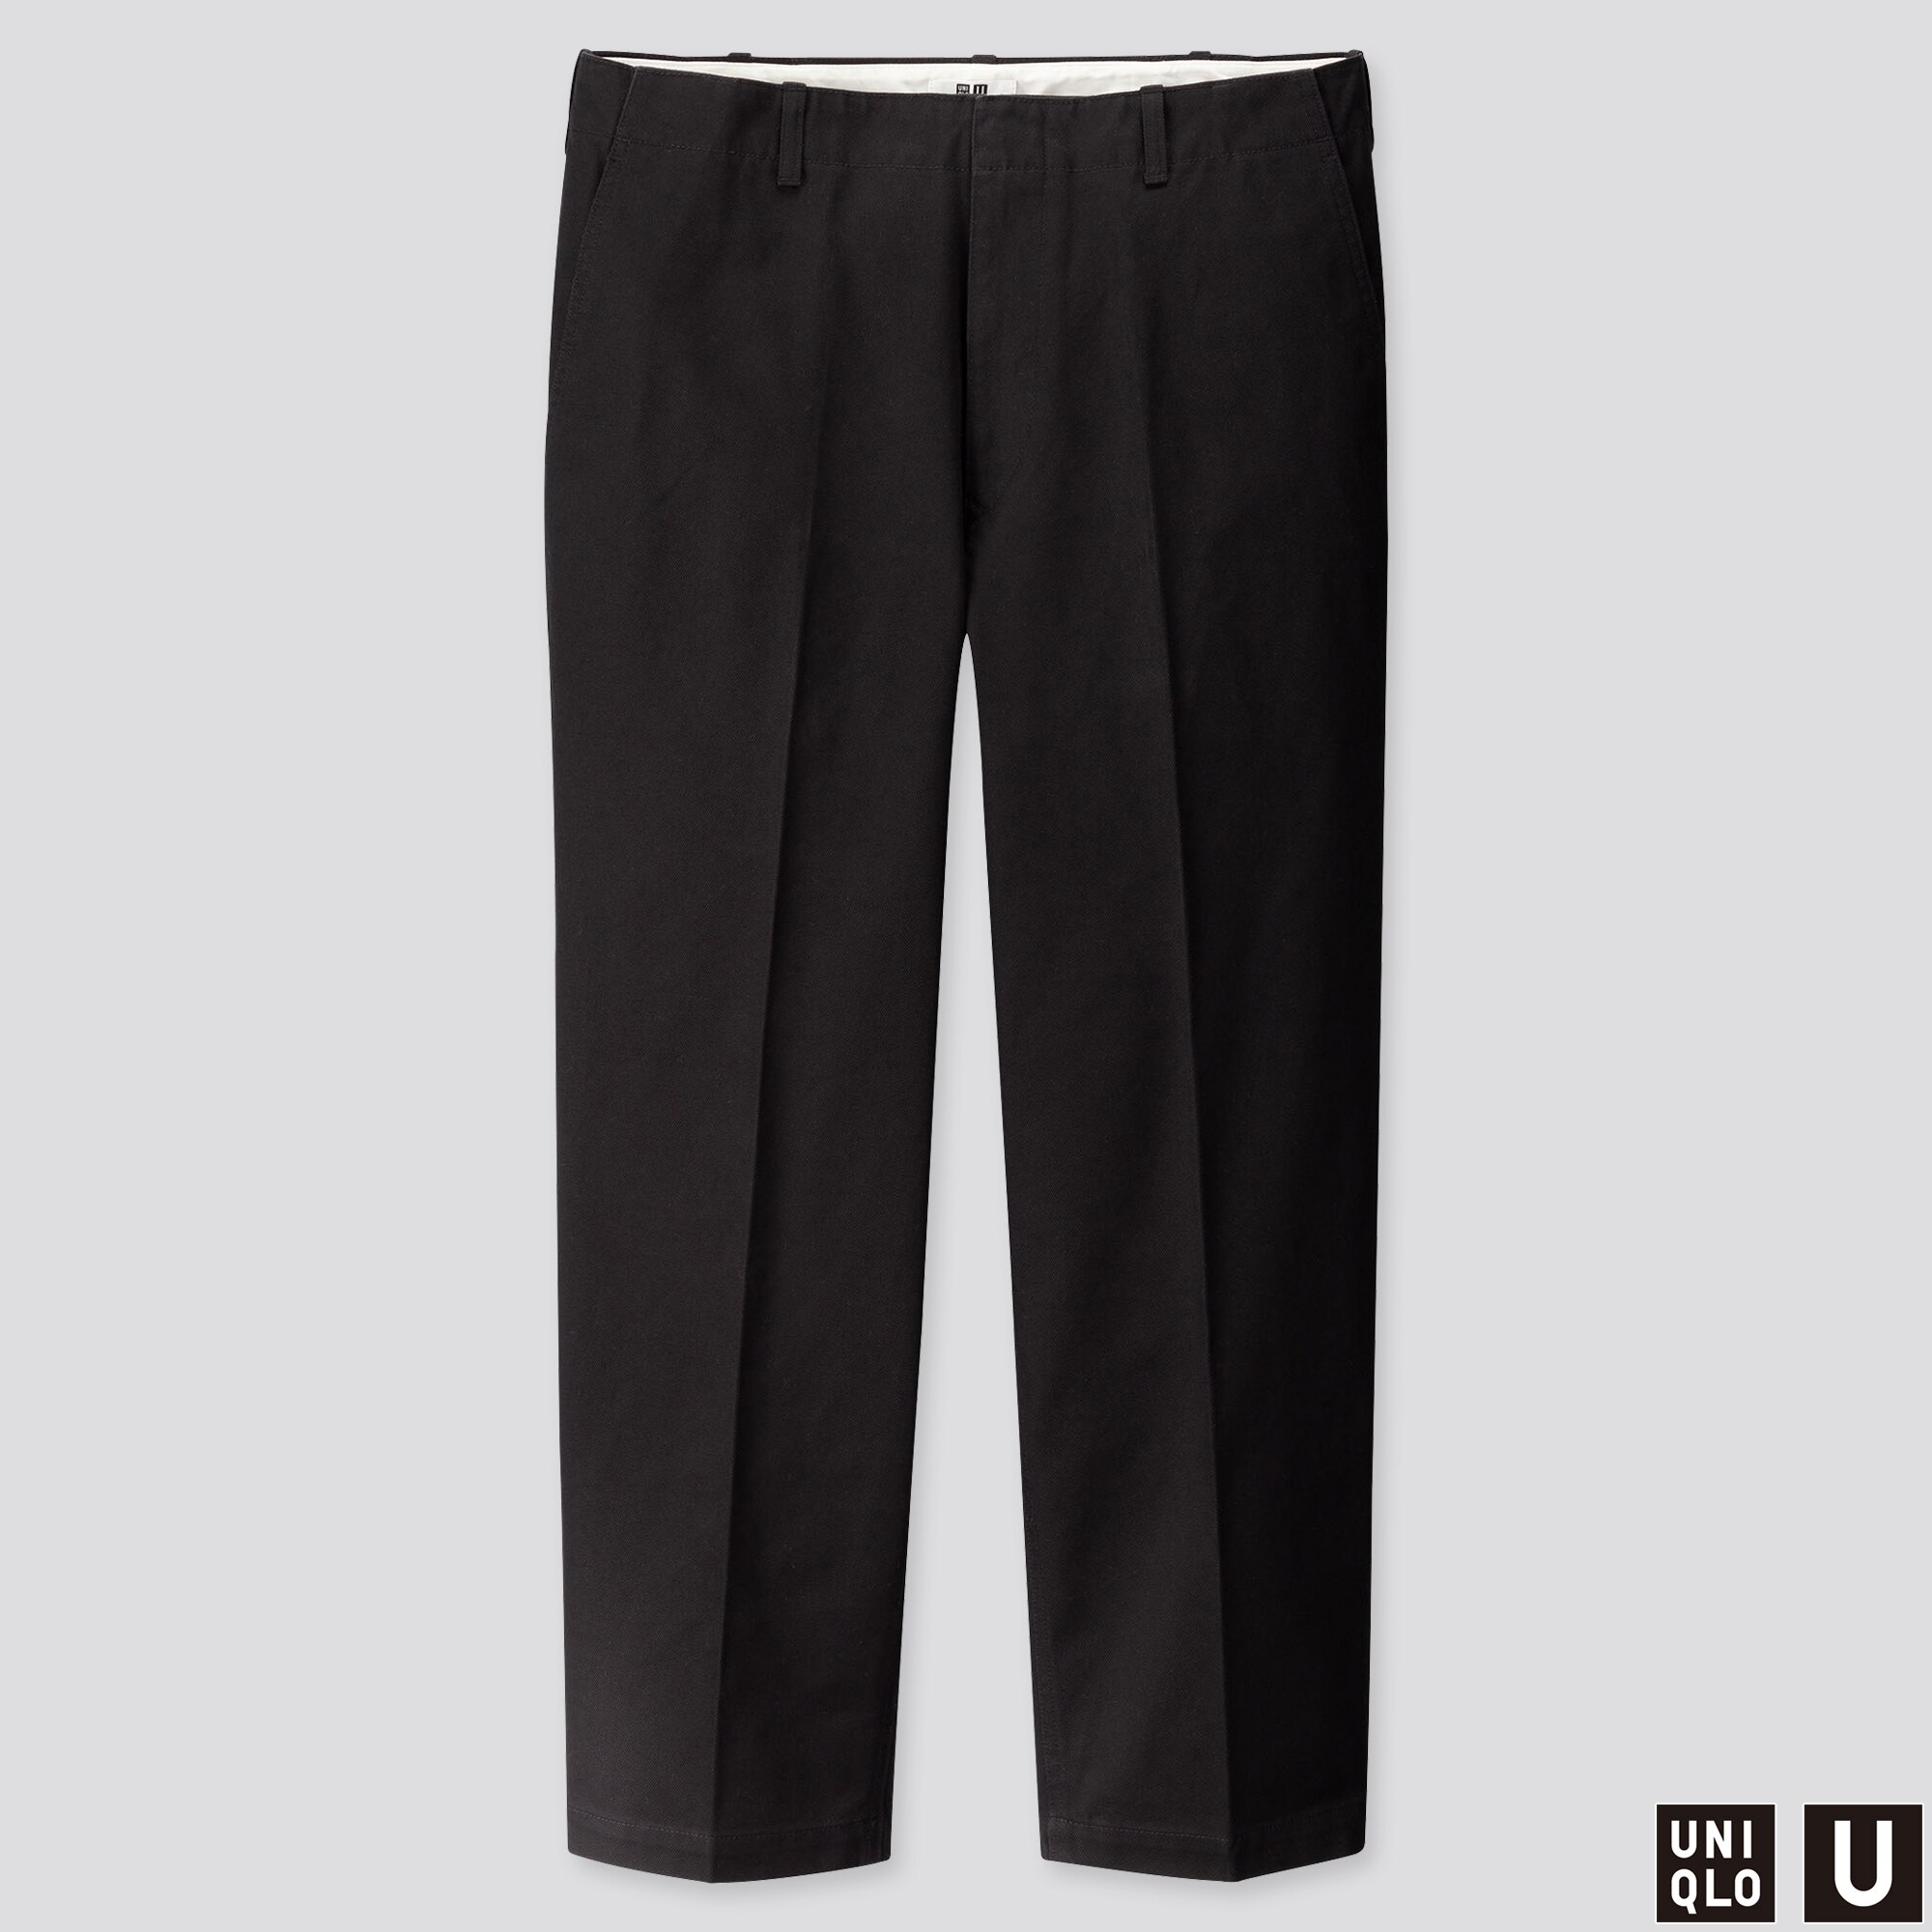 Stylish and Comfortable Men's Trousers